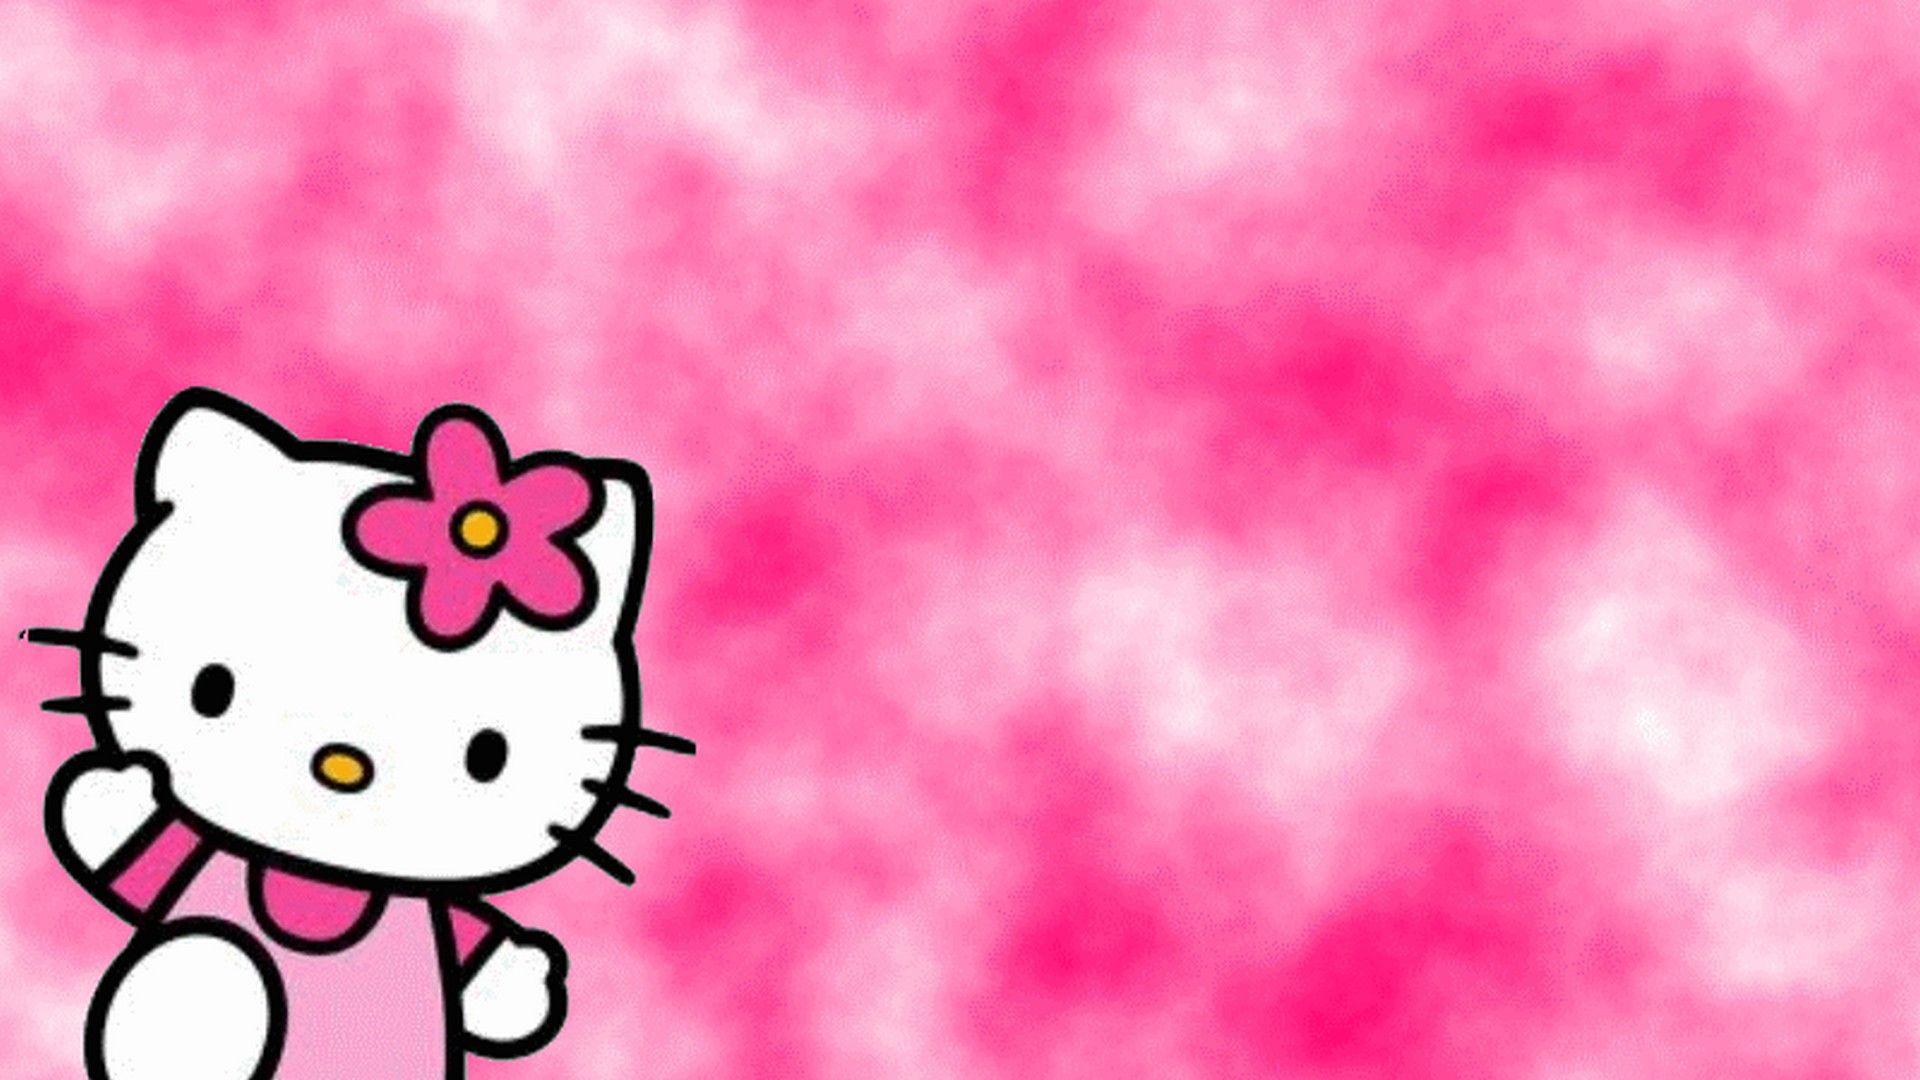 582067 1920x1080 hello kitty free backgrounds desktop PNG 149 kB  Rare  Gallery HD Wallpapers